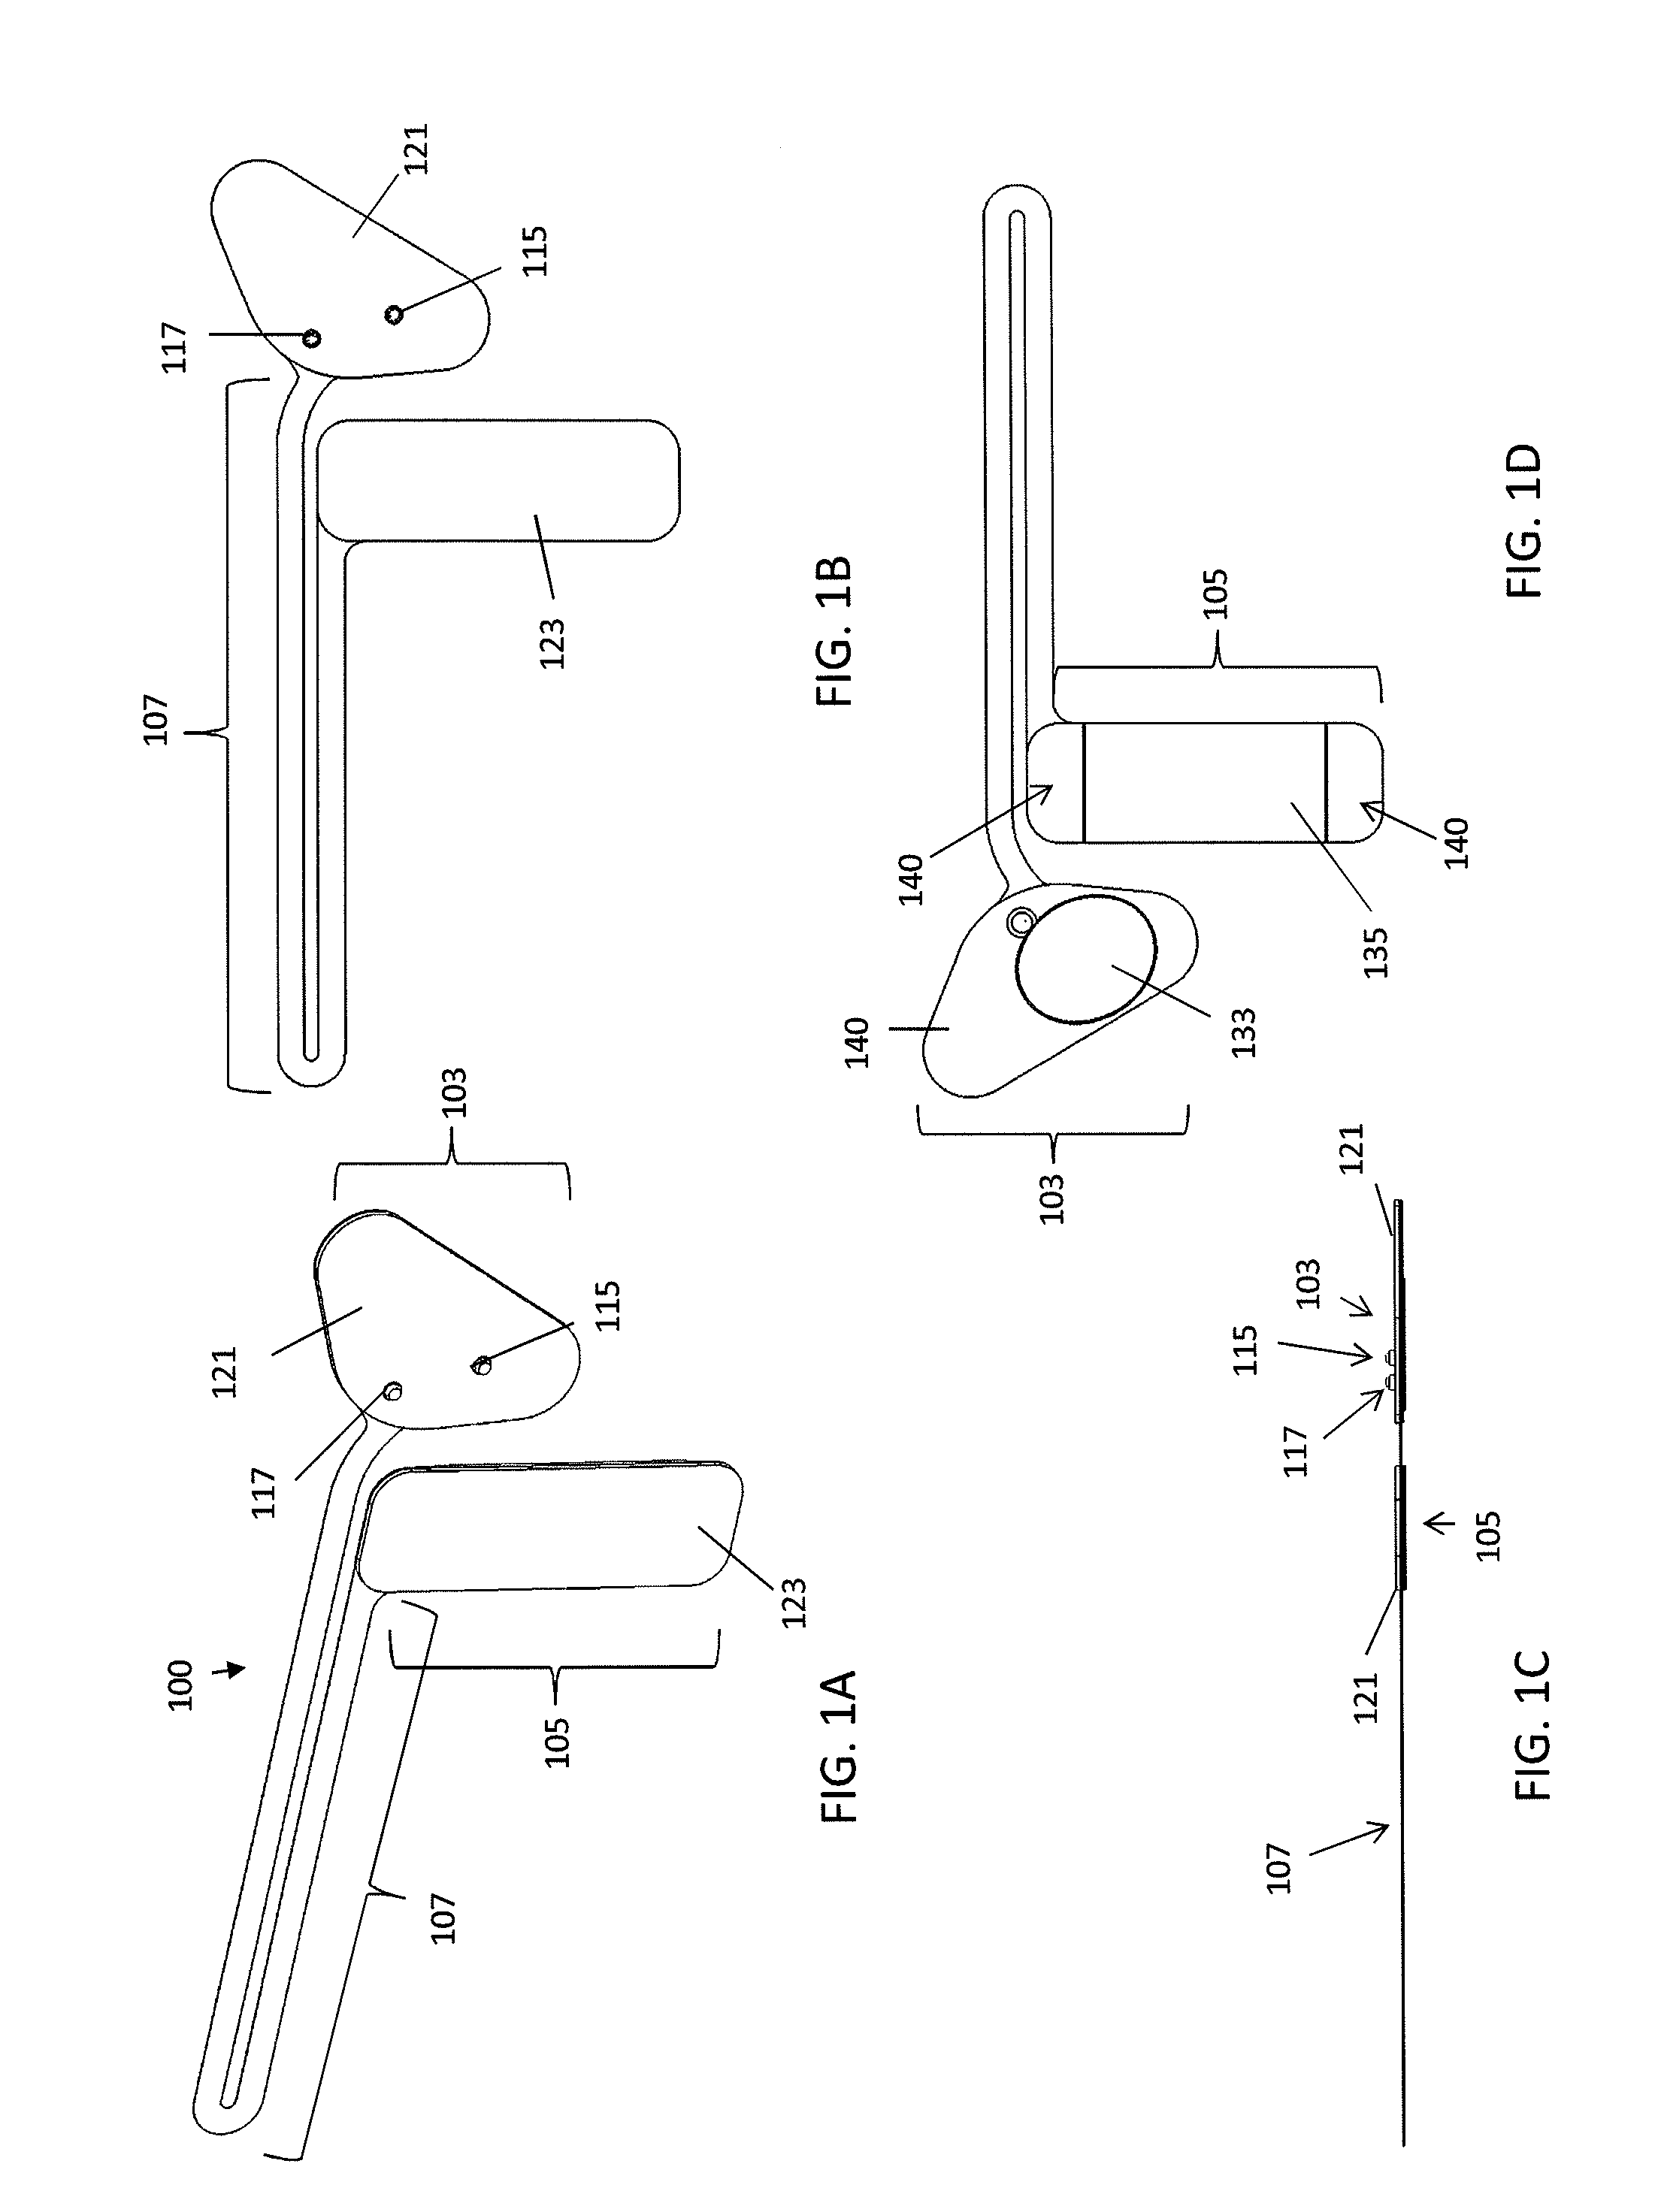 Methods for attaching and wearing a neurostimulator